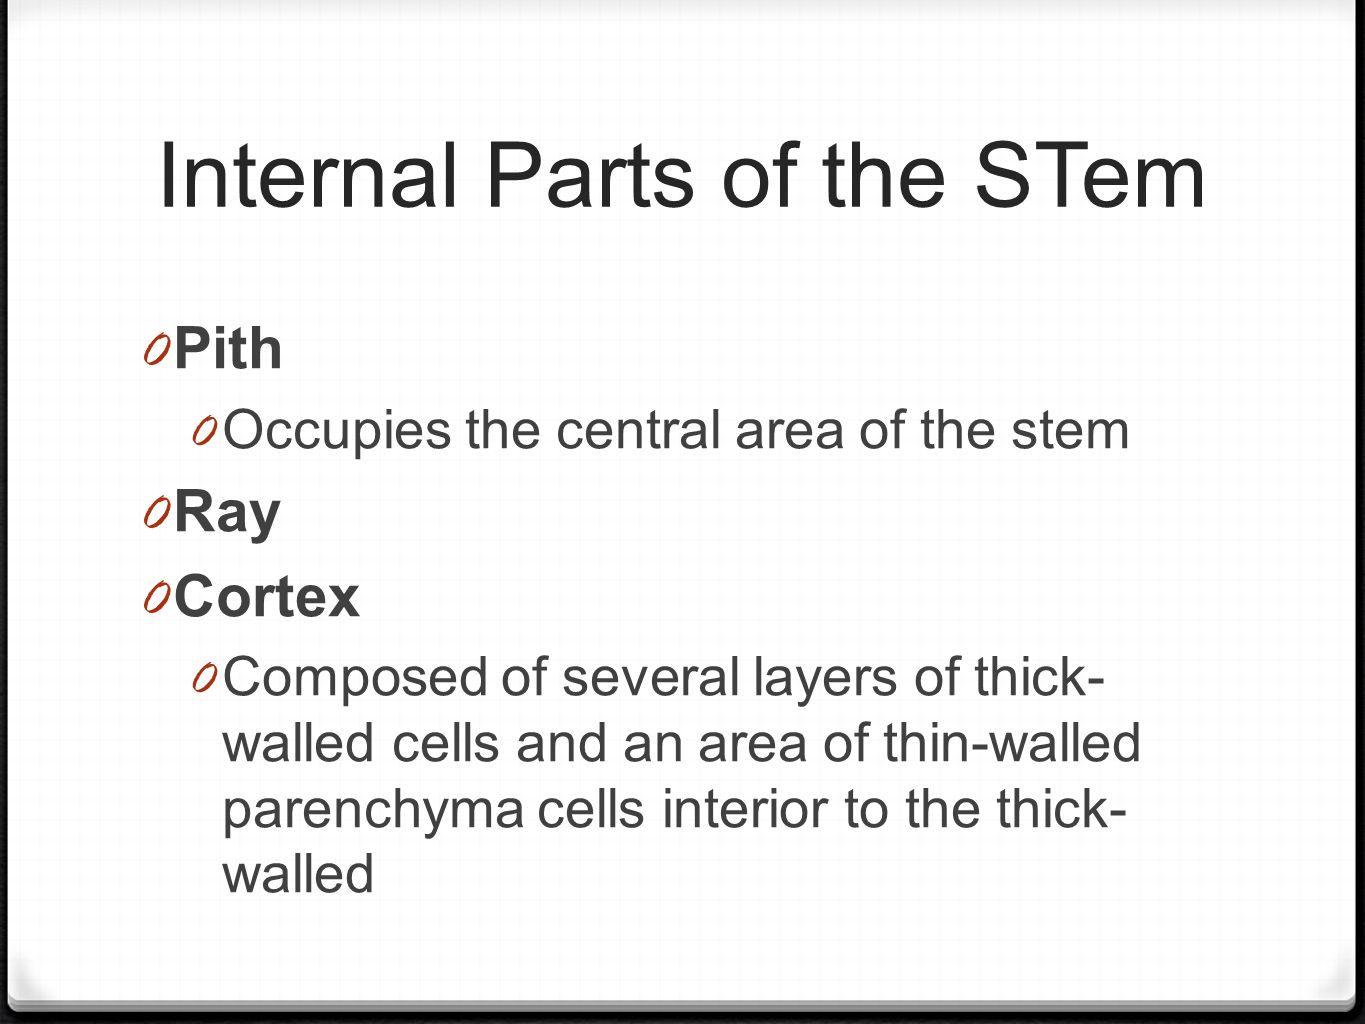 Internal Parts of the STem 0 Pith 0 Occupies the central area of the stem 0 Ray 0 Cortex 0 Composed of several layers of thick- walled cells and an area of thin-walled parenchyma cells interior to the thick- walled